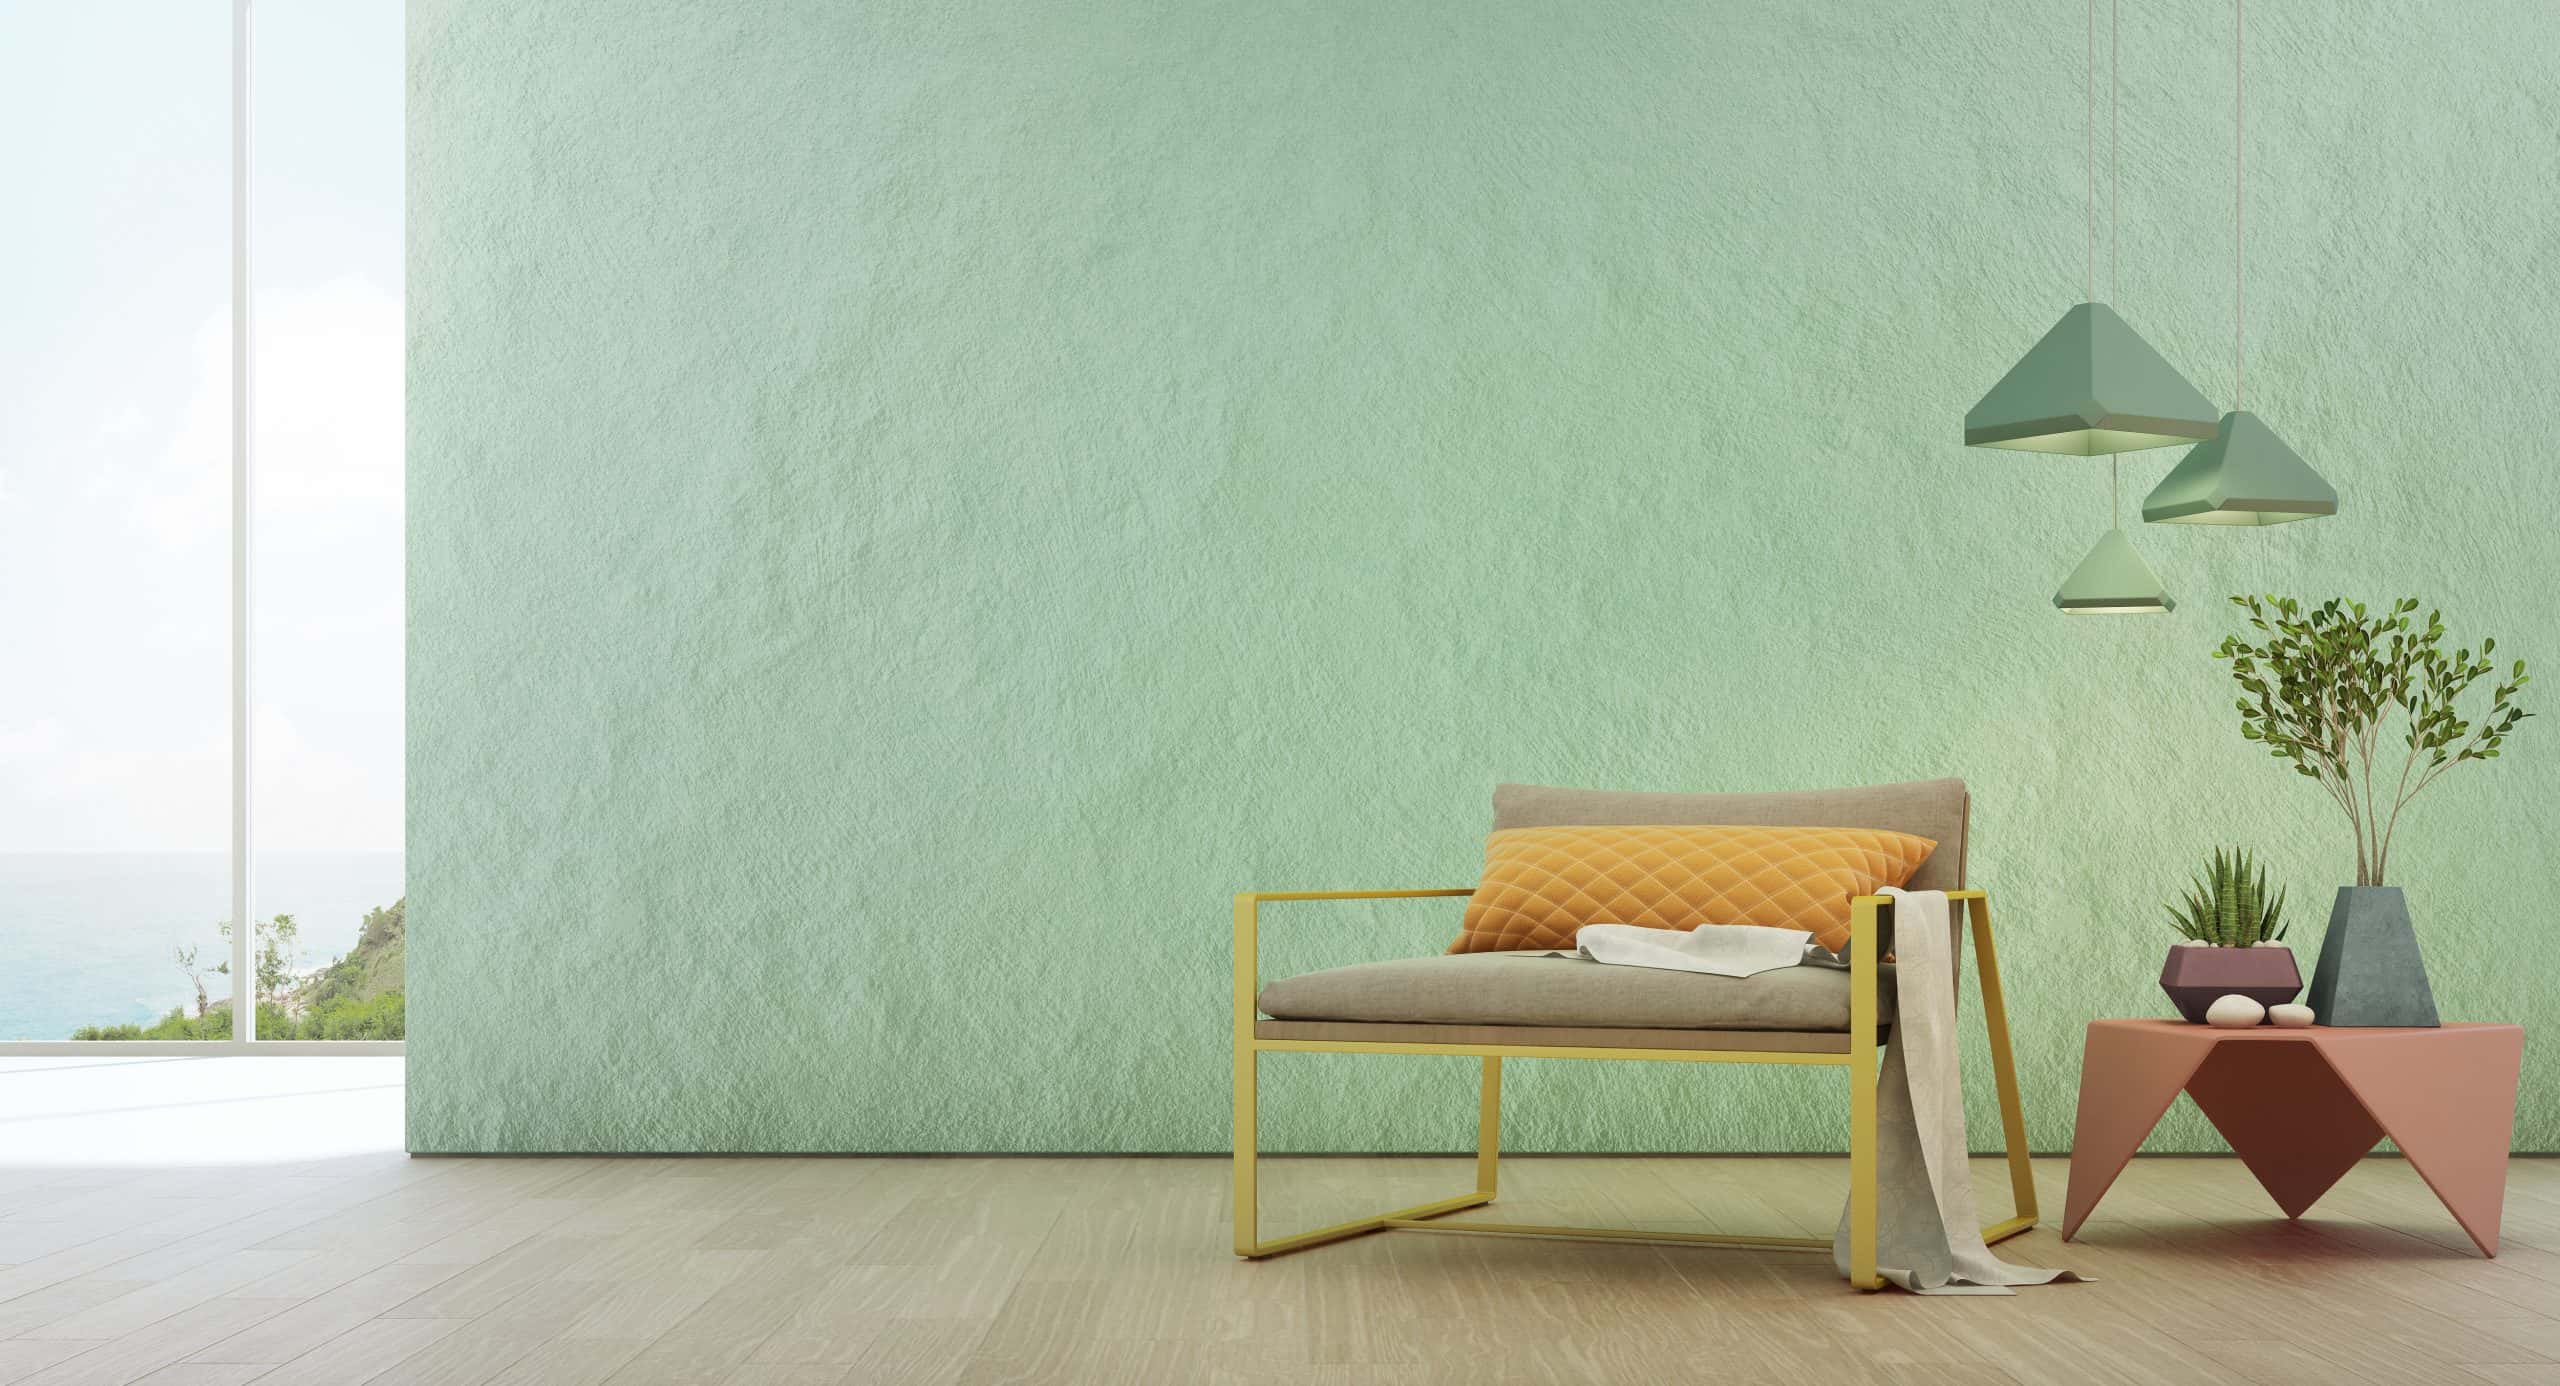 Decorate Your Home With Pastel Wallpapers - HomeLane Blog